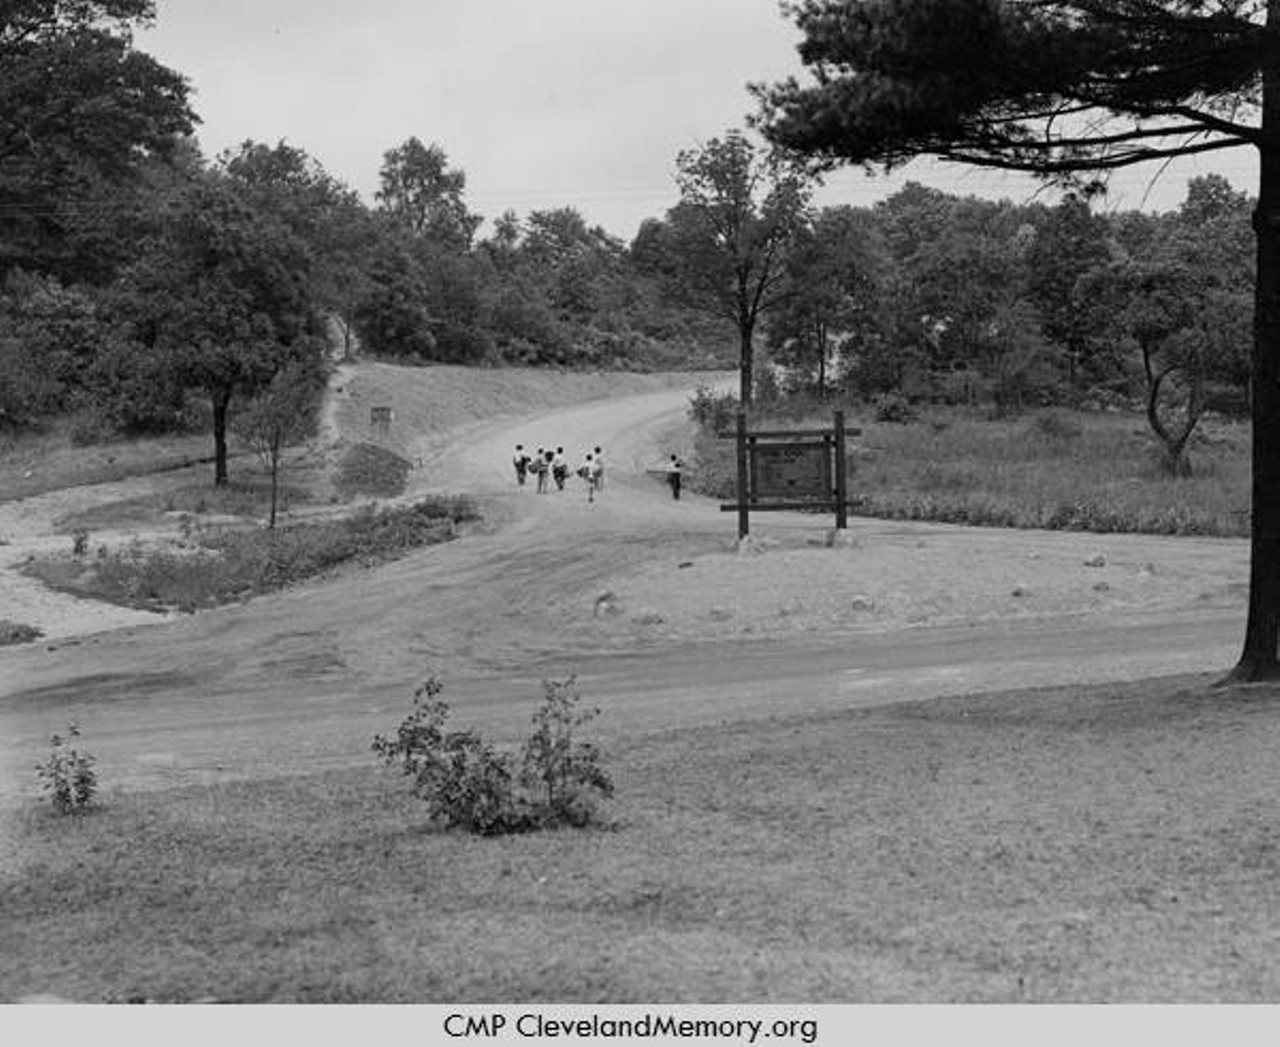  Road Being Built at Virginia Kendall Park by Civilian Conservation Corps, 1934 